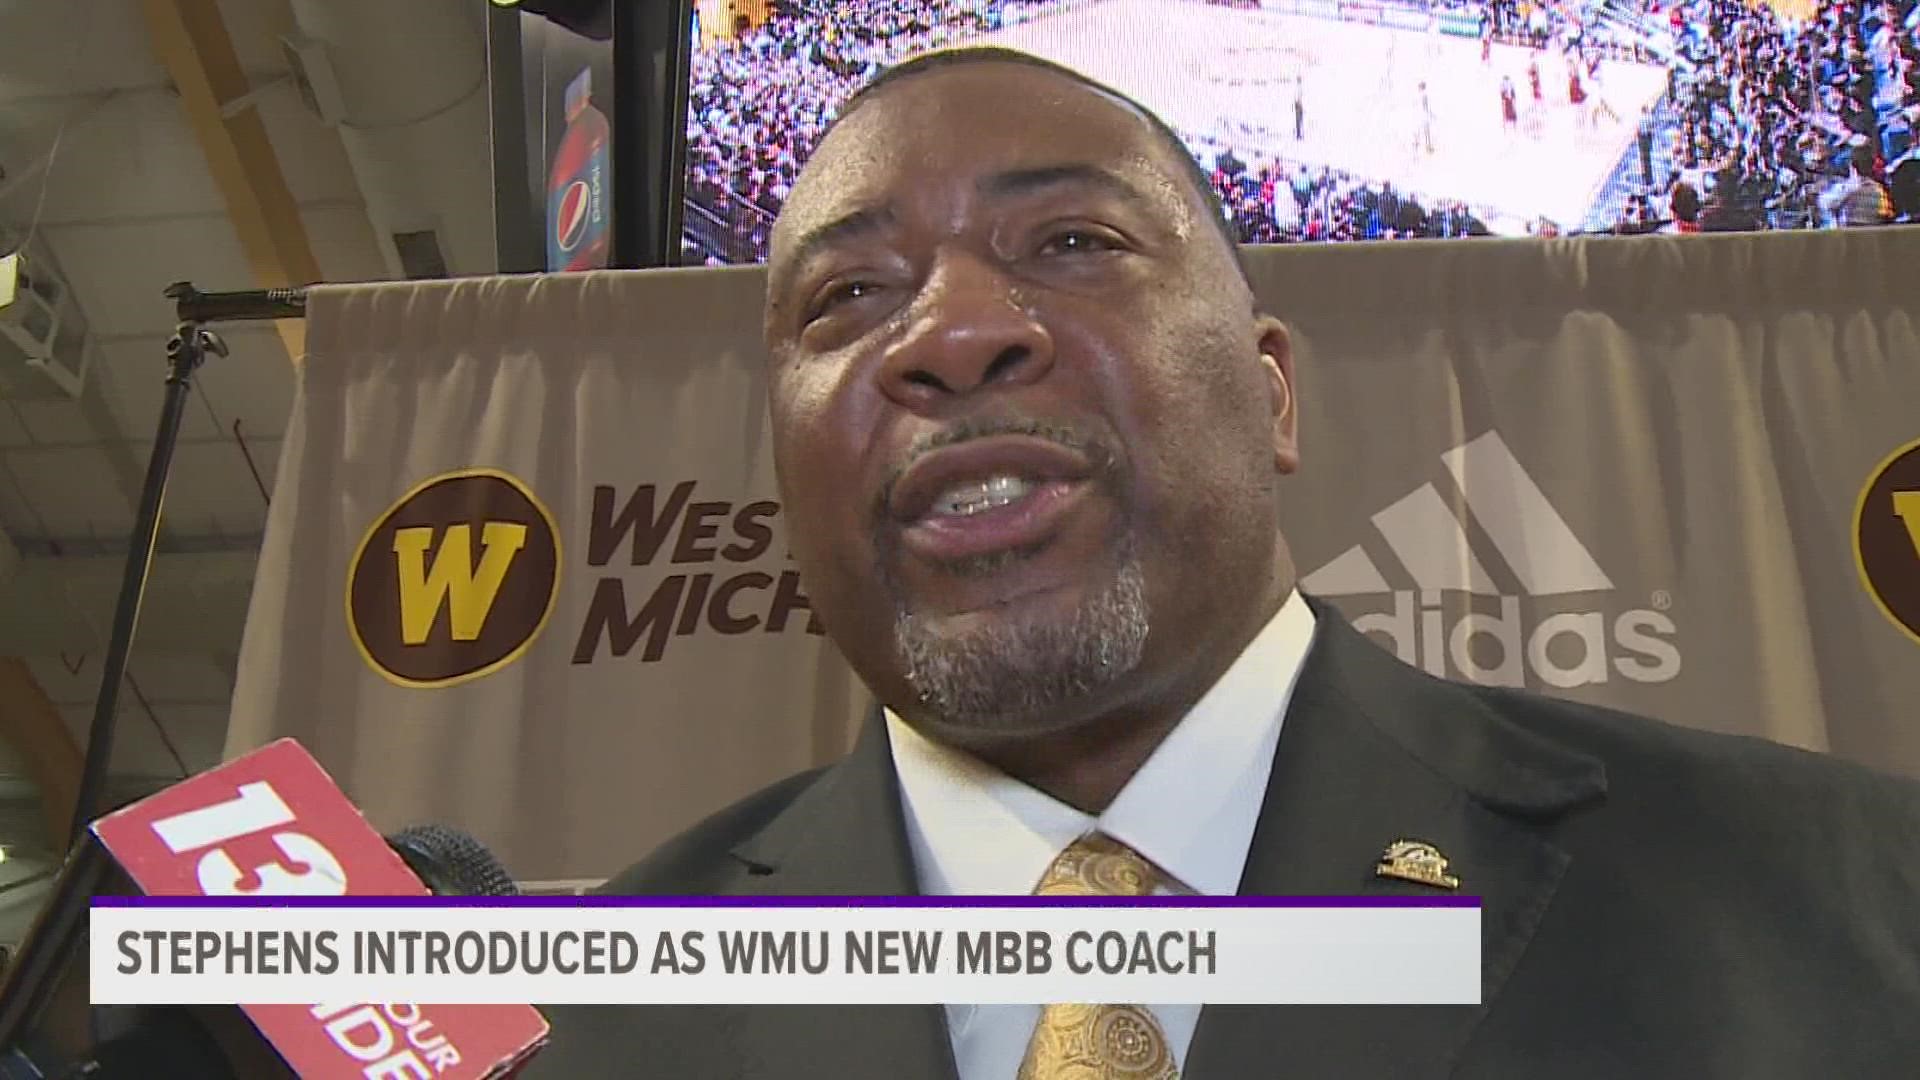 The former MSU assistant was introduced at a press conference Wednesday.